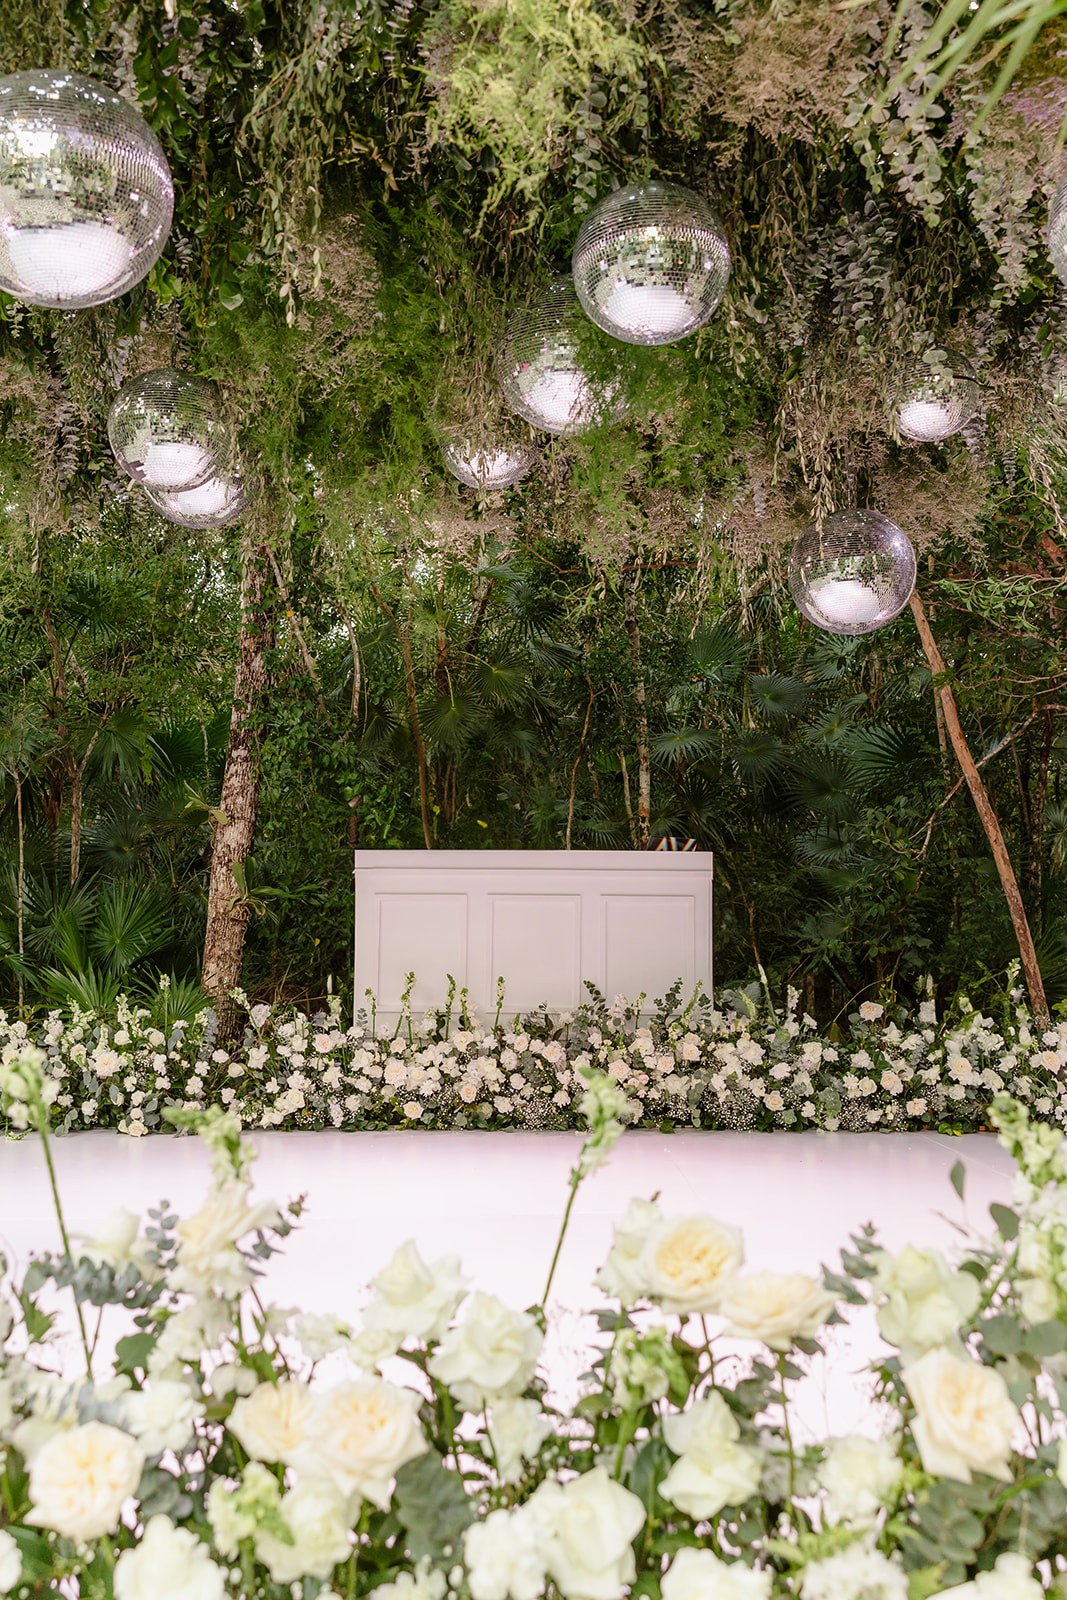 Disco jungle dance floor surrounded by white roses in Tulum 